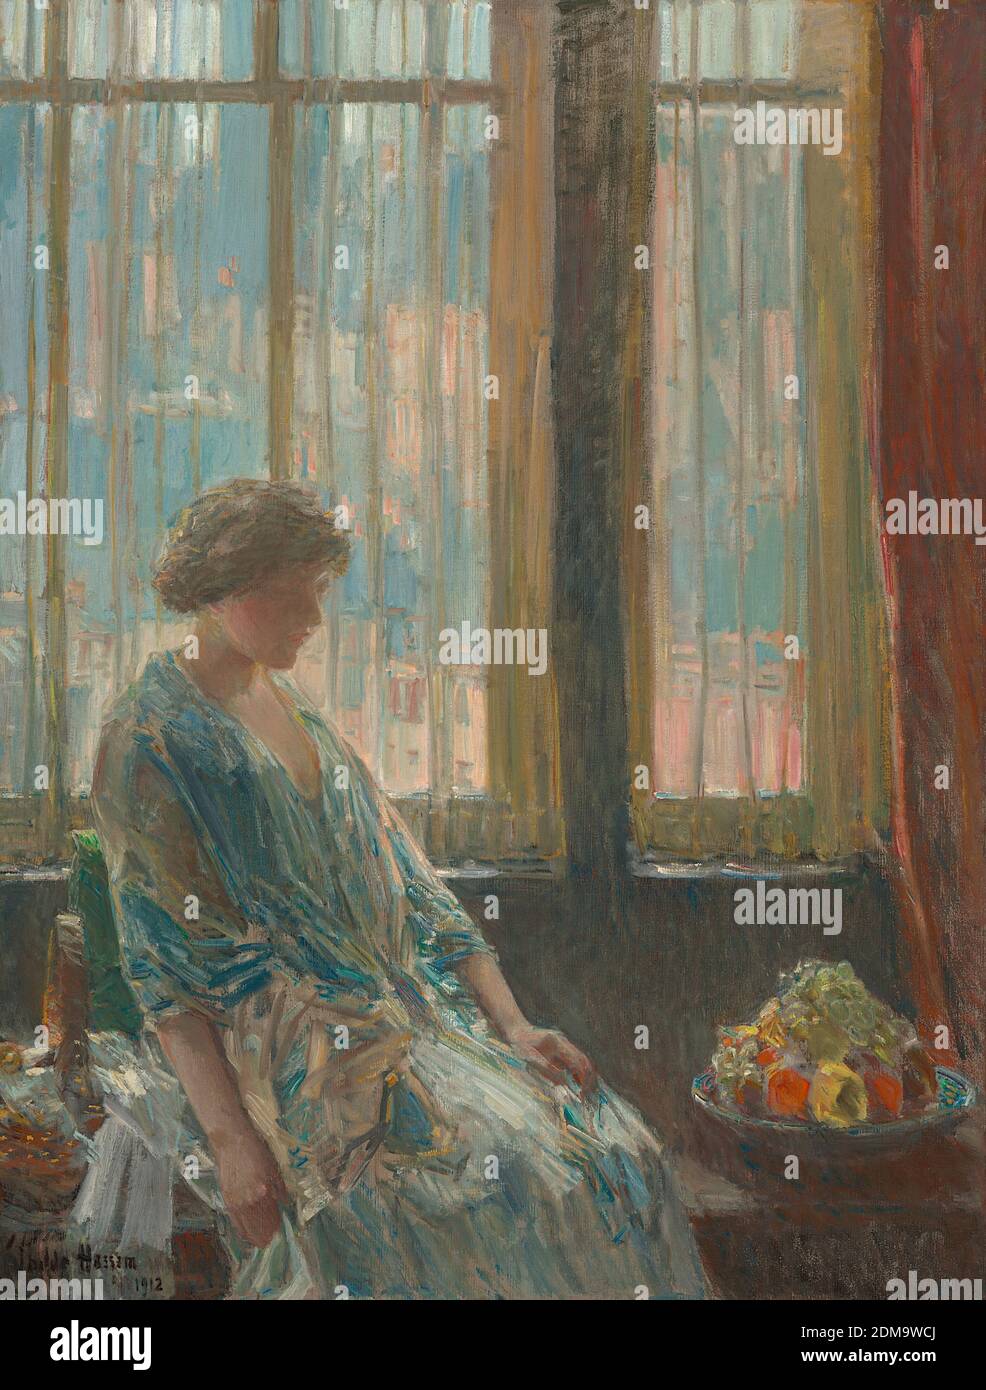 The New York Window, 1912 American Impressionist Painting by Childe Hassam - Very high resolution and quality image Stock Photo